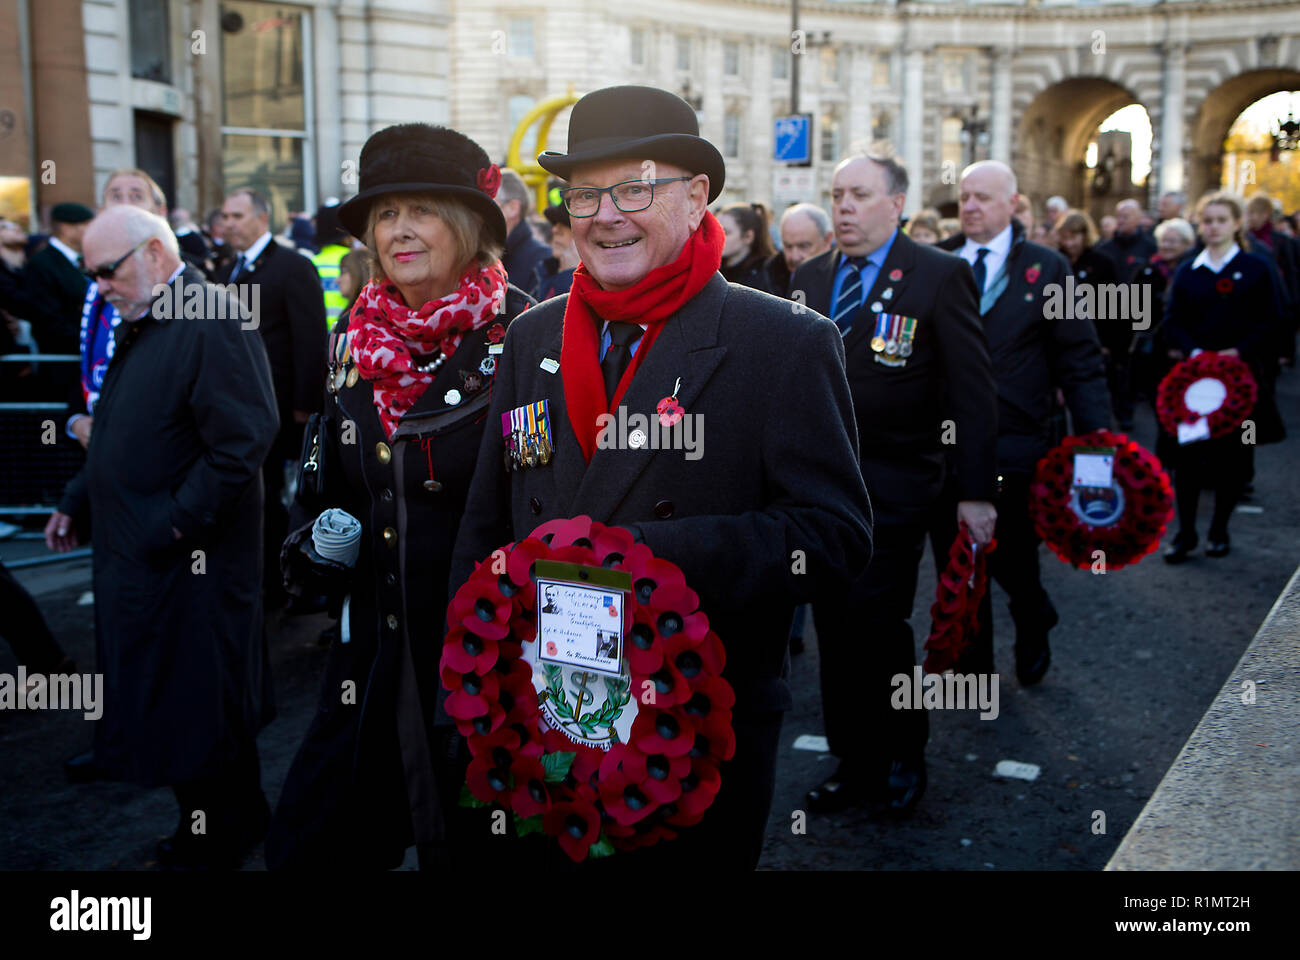 London, England, UK - 11th Nov 2018. Participants carrying wreaths of poppies in the Remembrance Day Celebrations walking from Admiralty Arch into Horse Guards Parade to honour the Centennial of Armistice Day 1918. (Photo © Michael Cole) Stock Photo